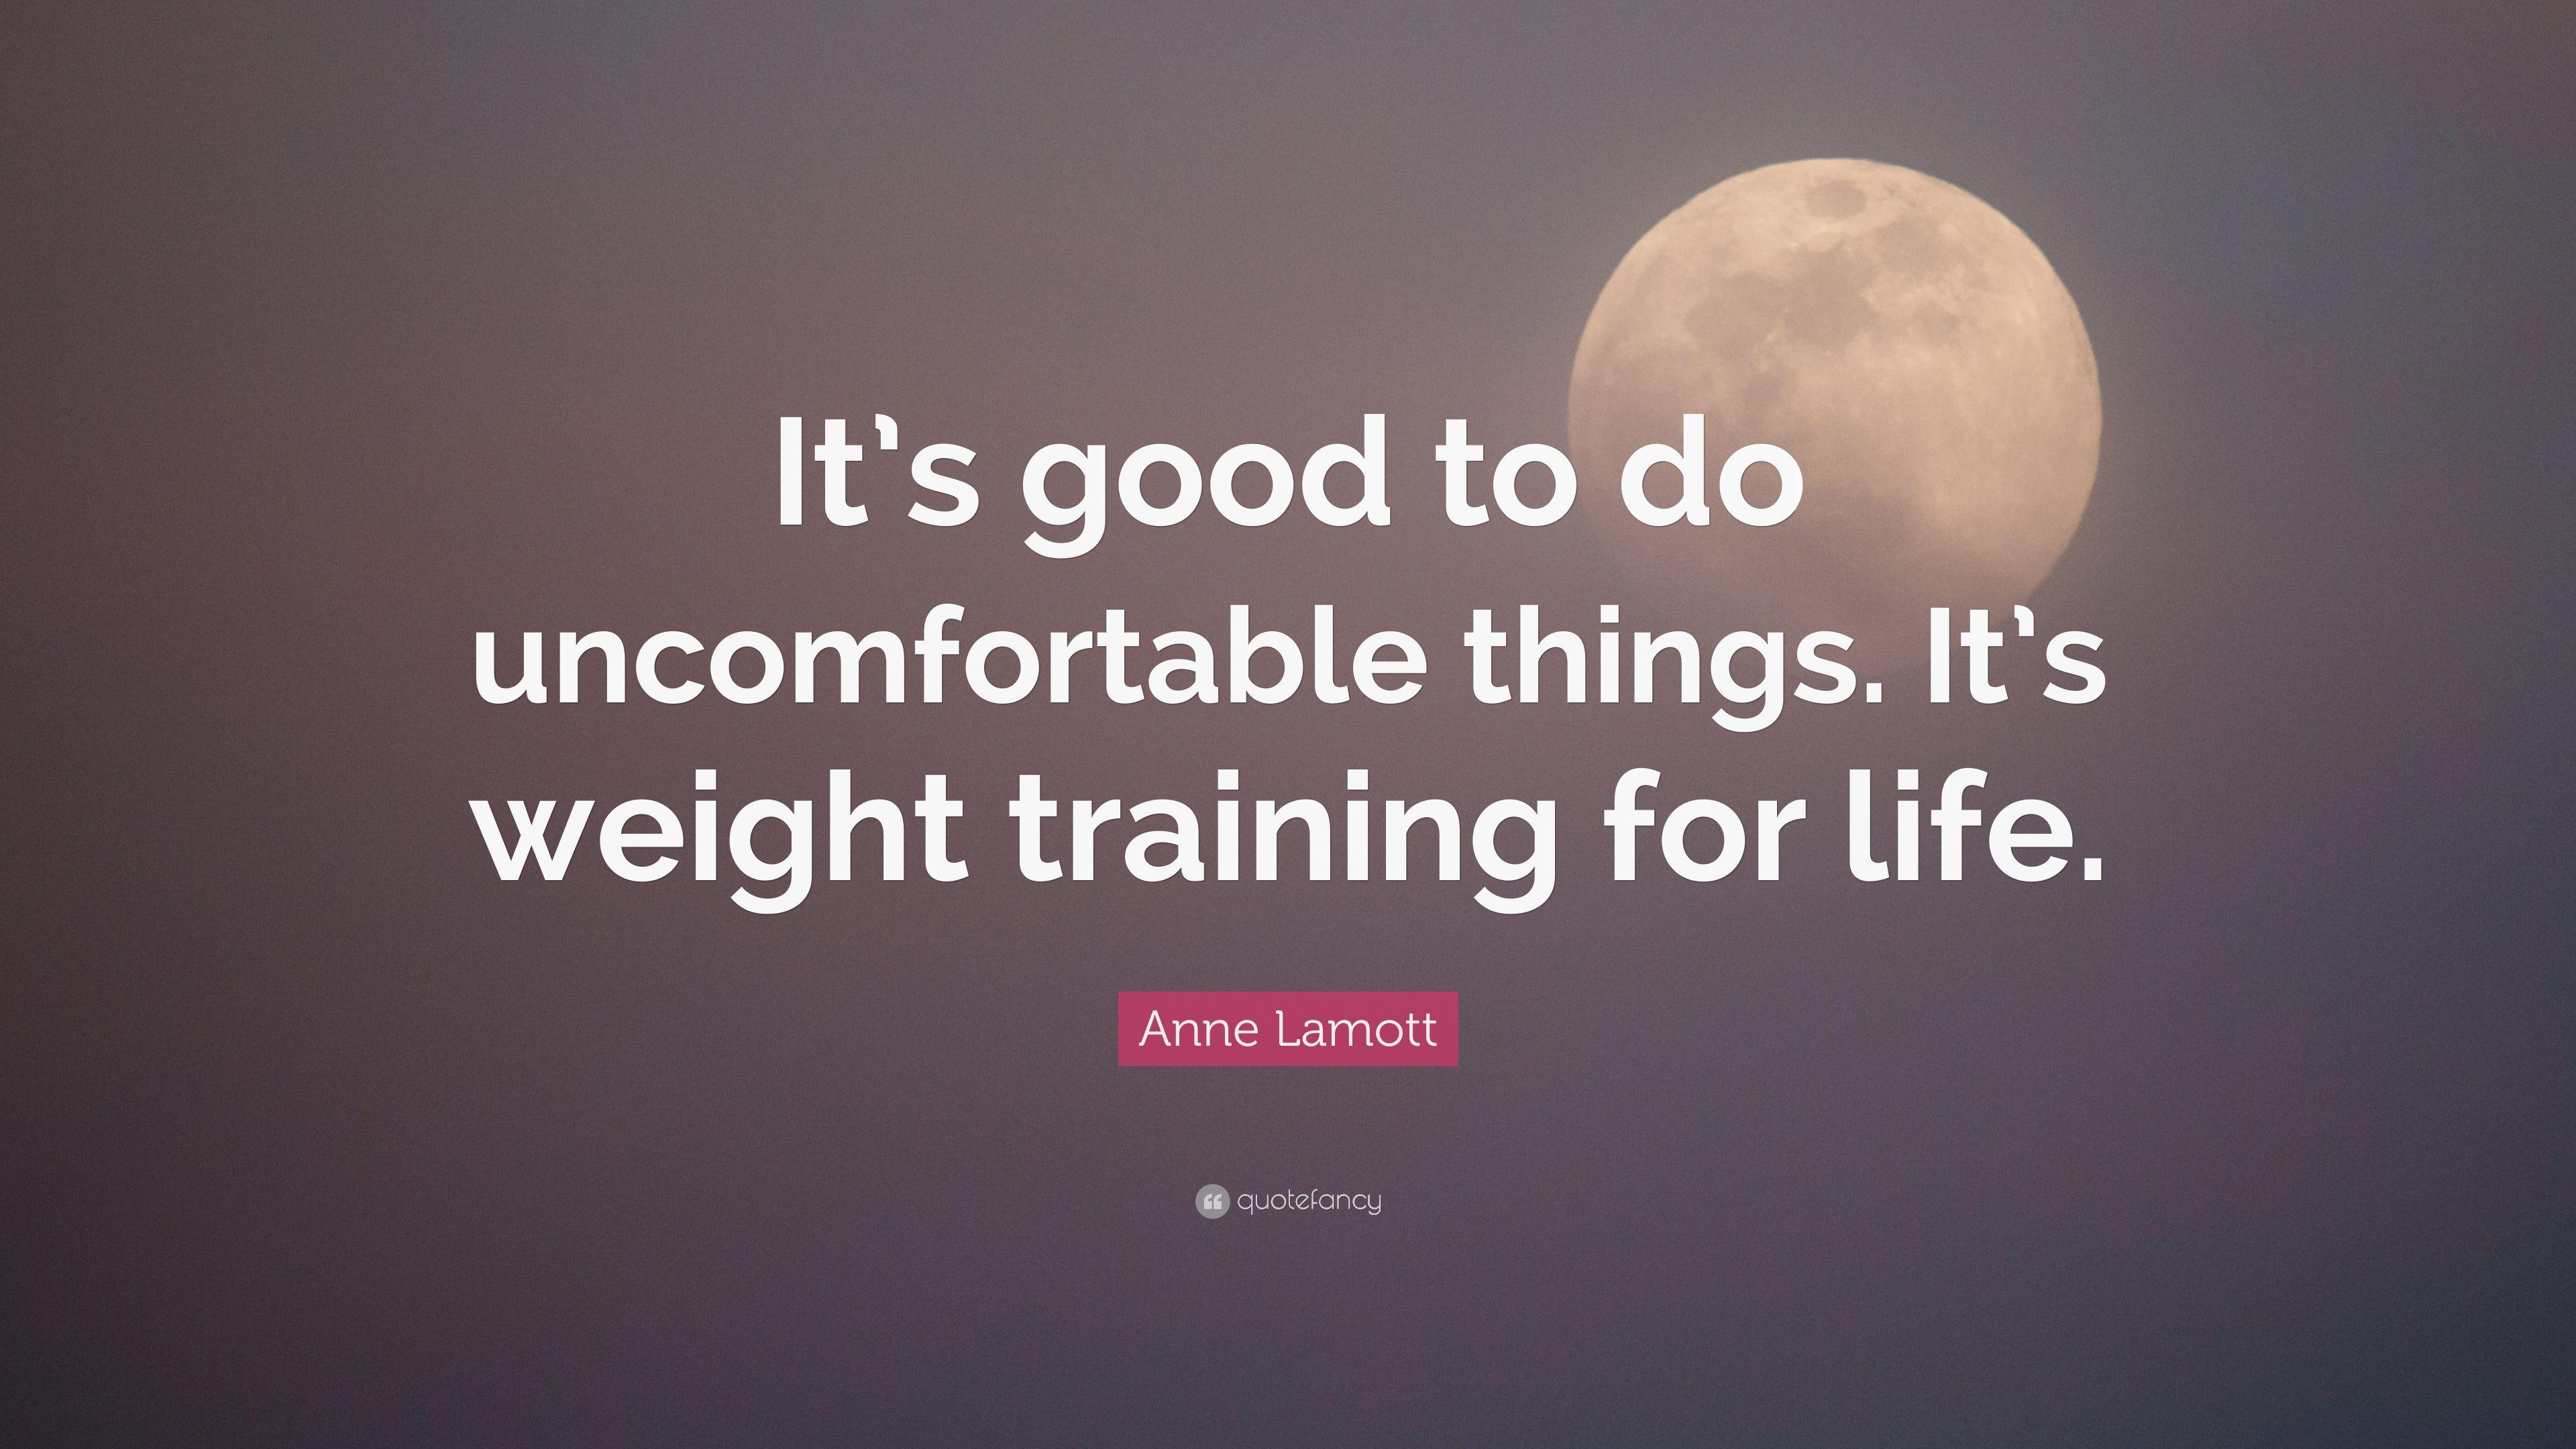 Anne Lamott Quote: “It's good to do uncomfortable things. It's